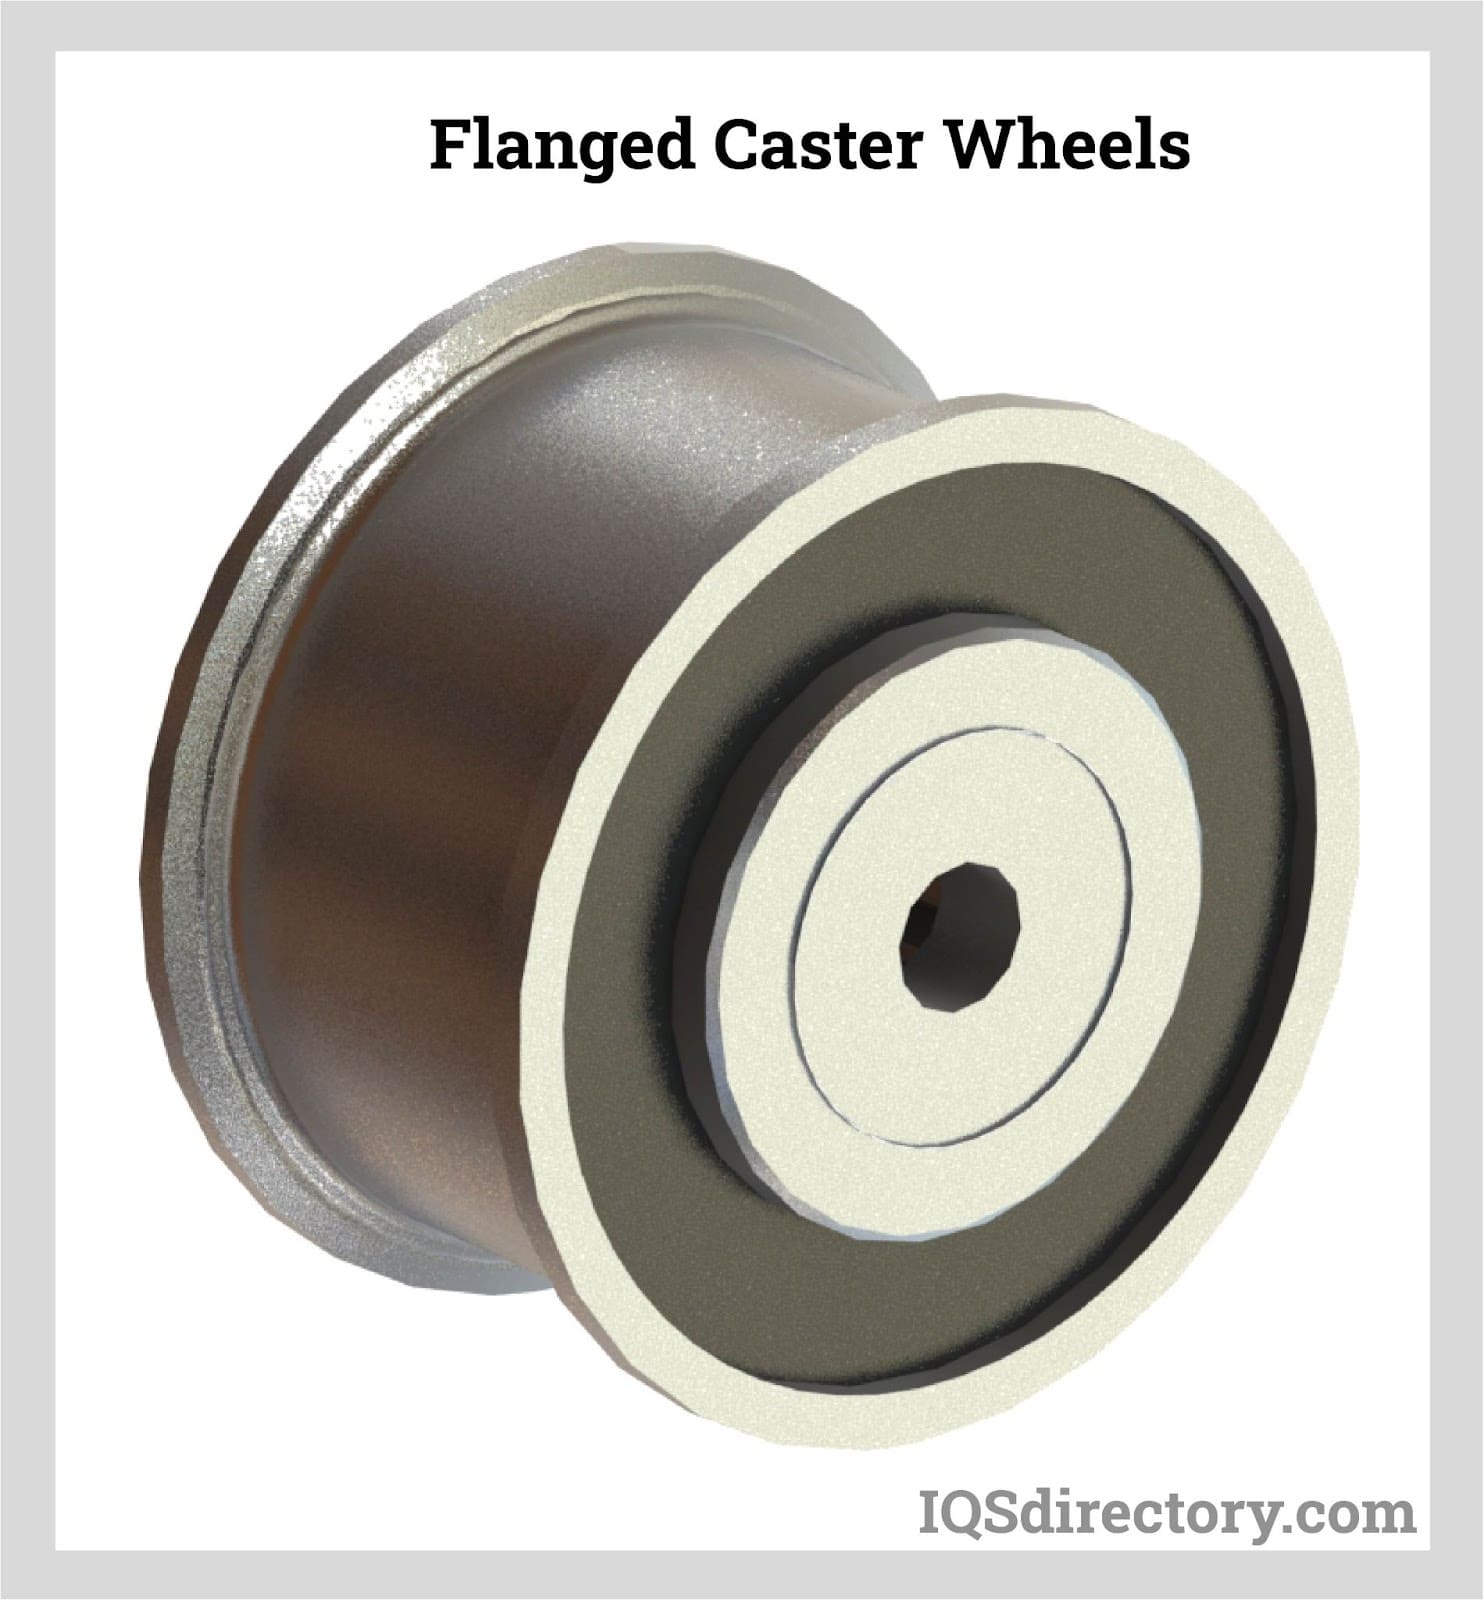 Flanged Caster Wheels